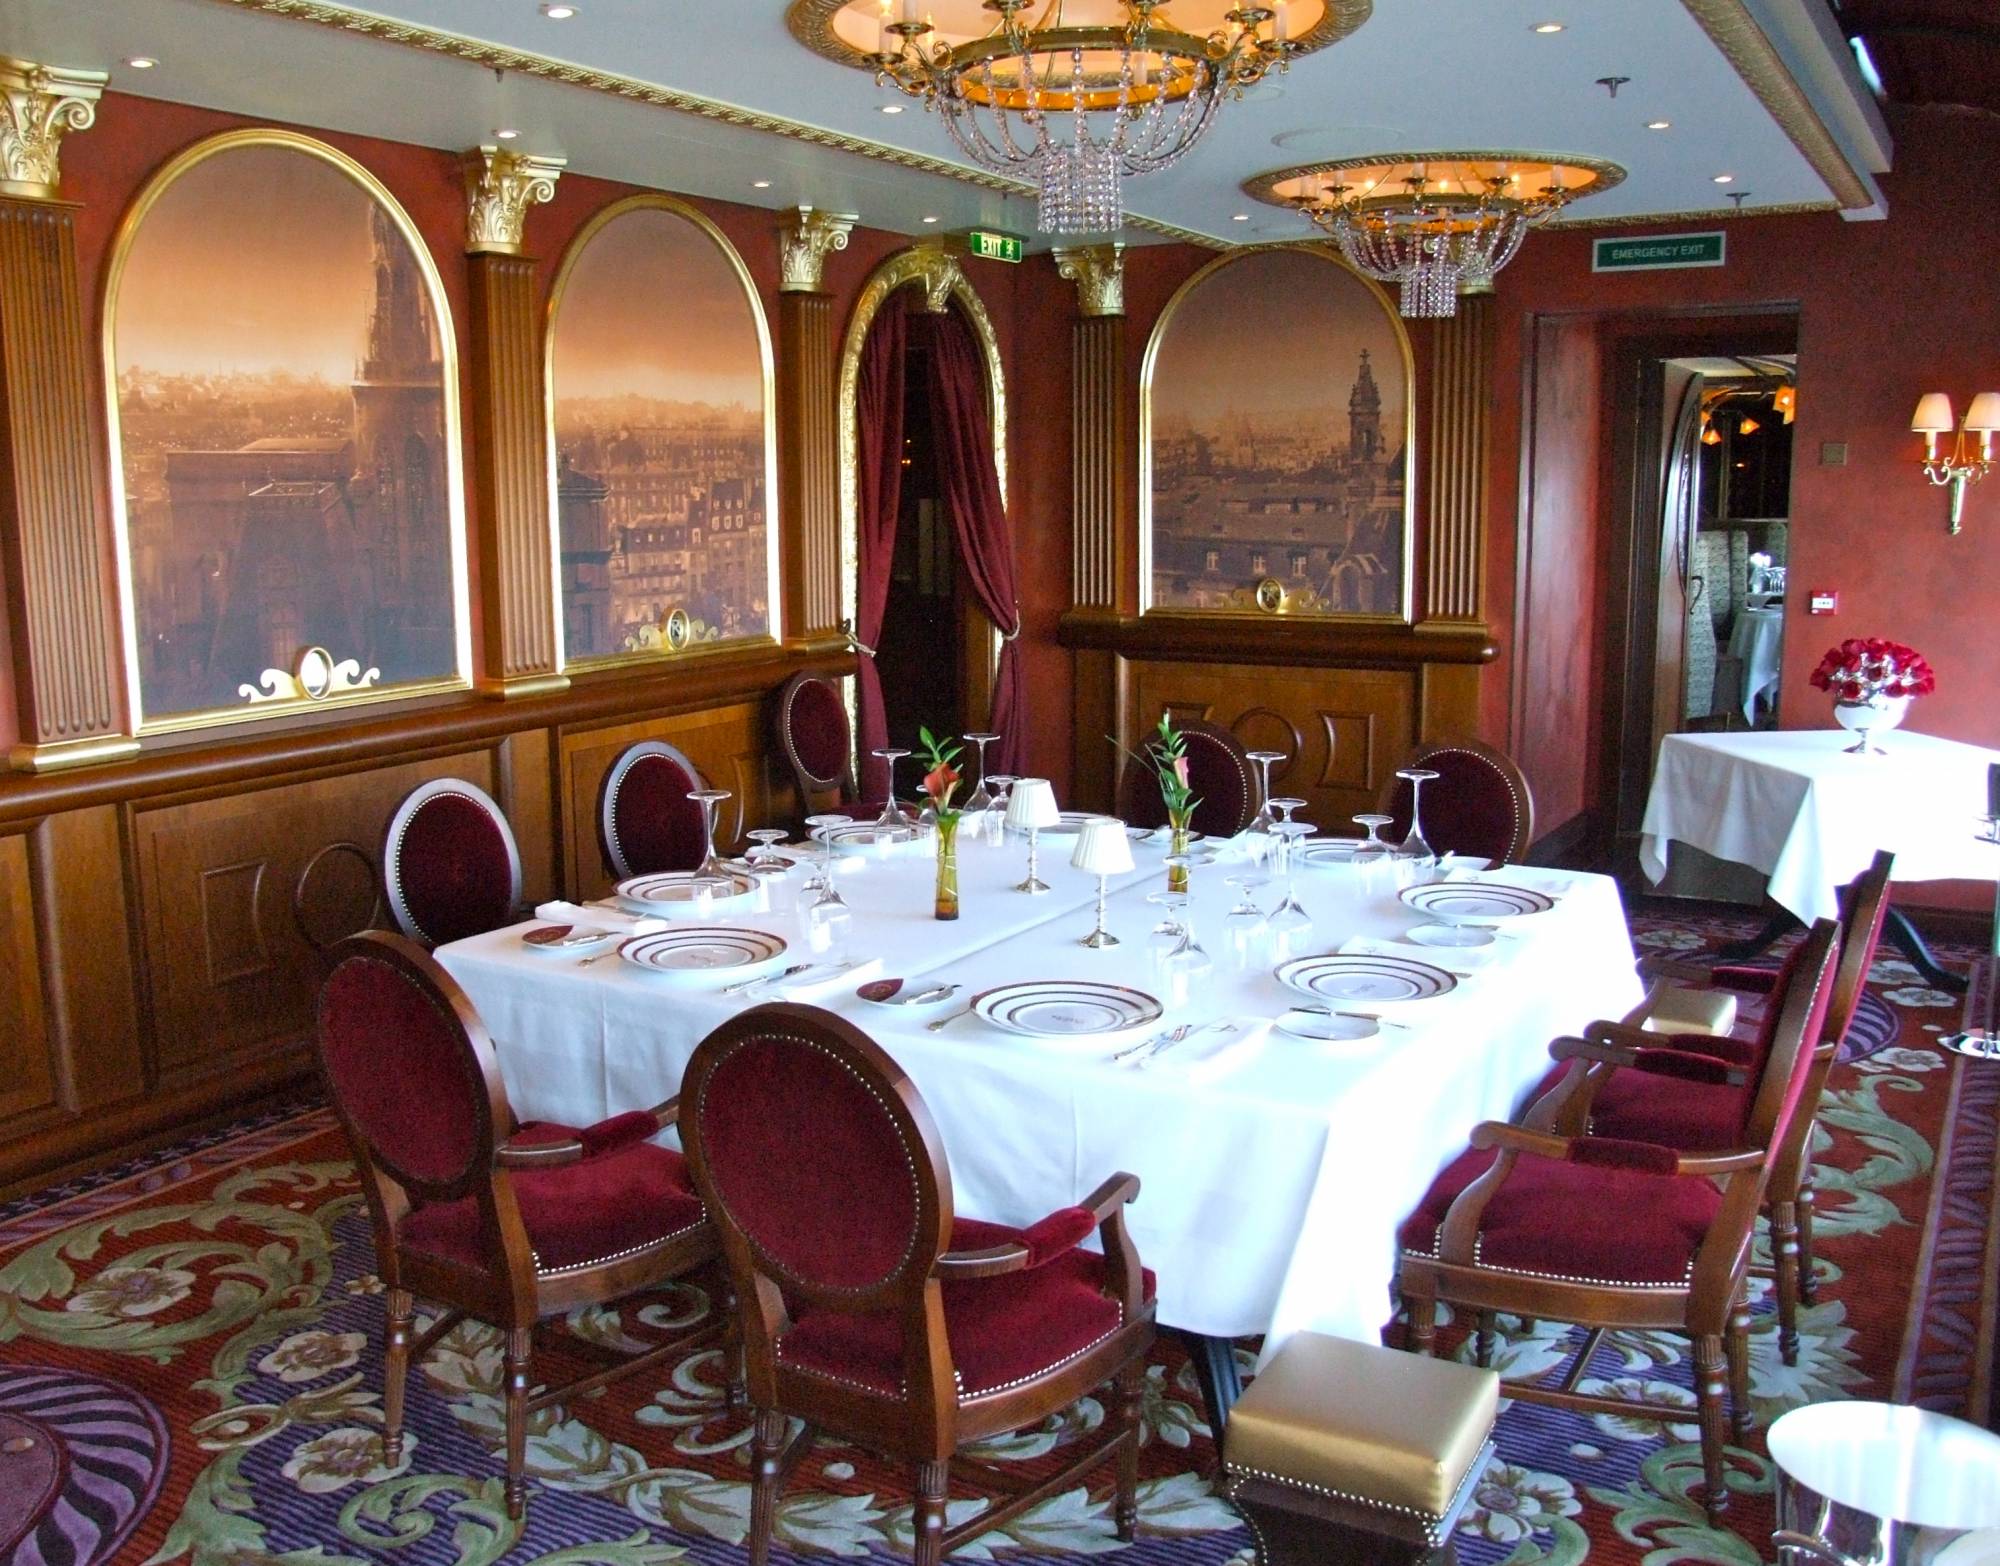 Disney Dream - Remy Chef's Table (Another View)